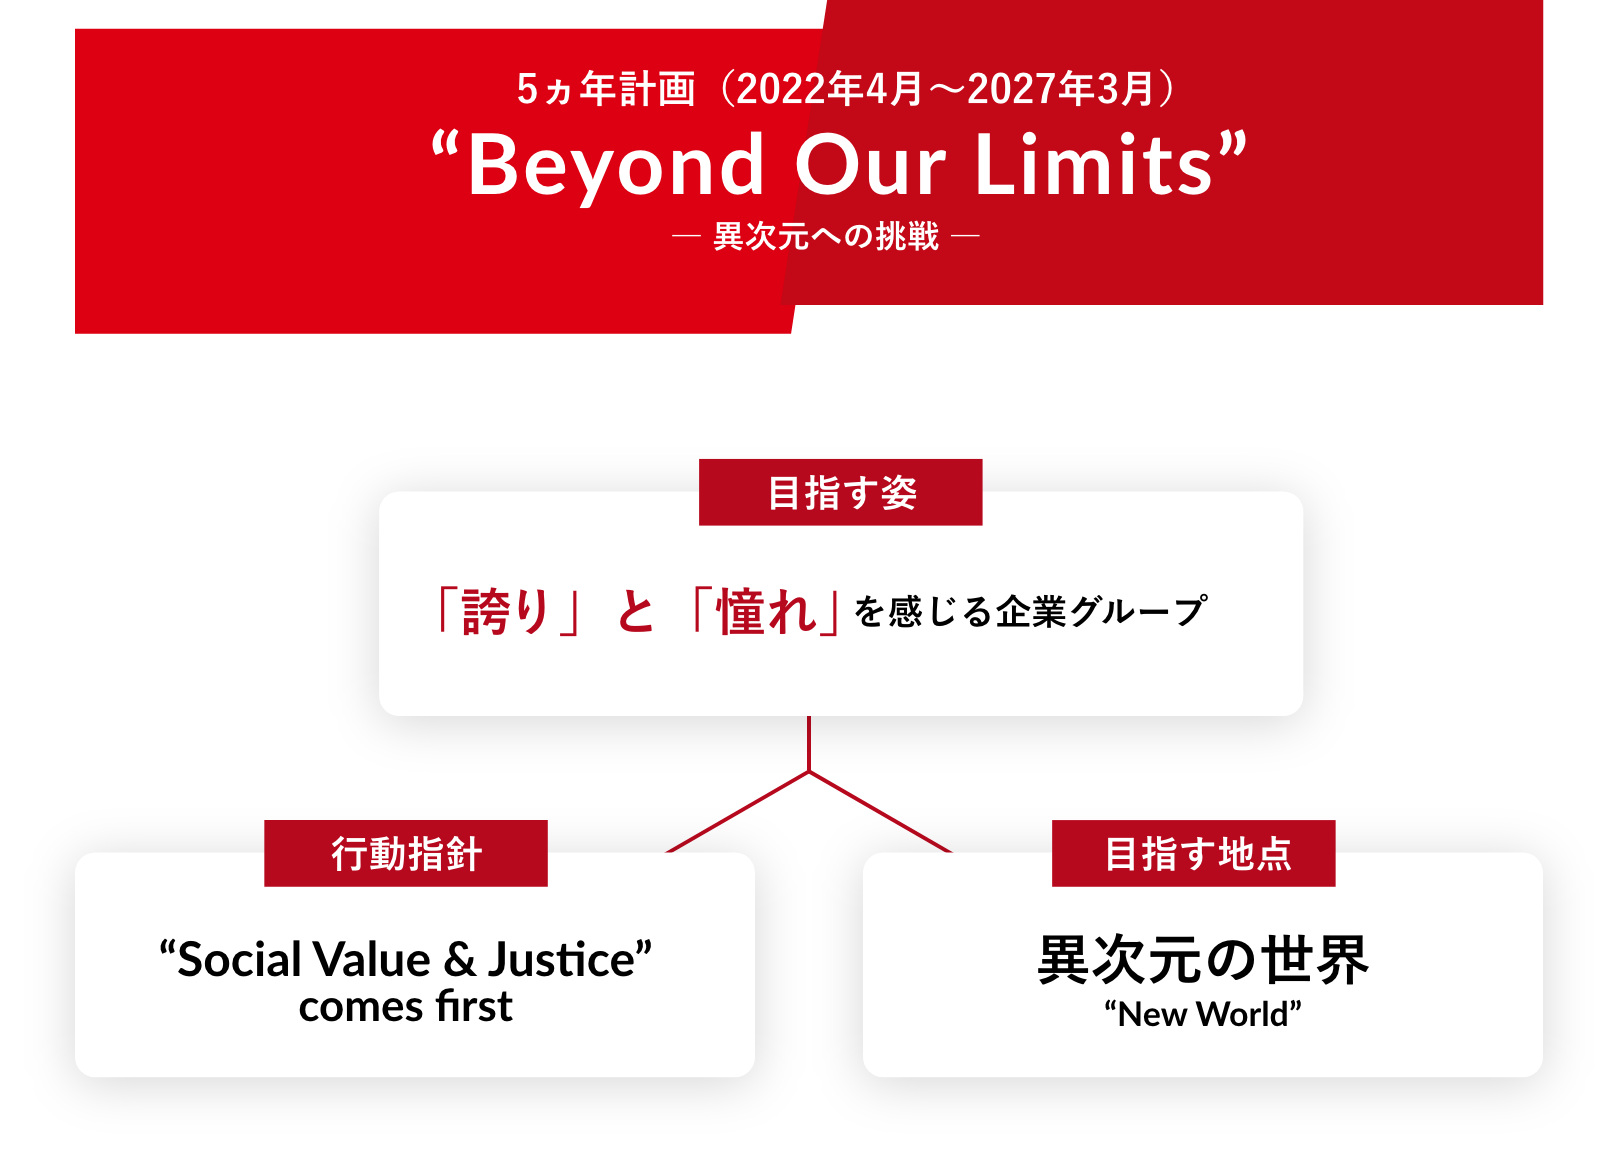 Beyond Our Limits